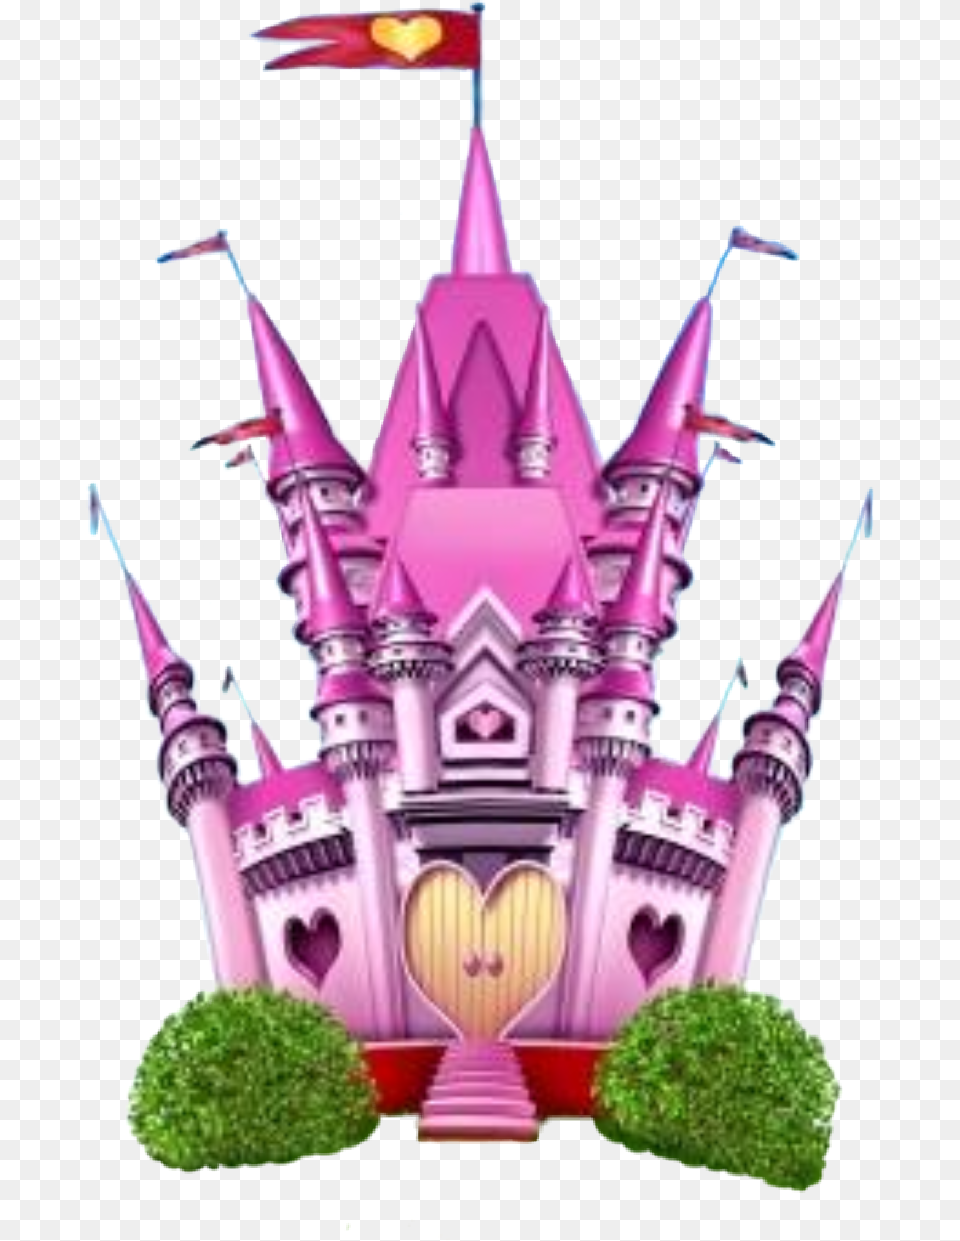 Castle Pink Whimsical Fantasy Princess Imitator Tots, Architecture, Building, Spire, Tower Png